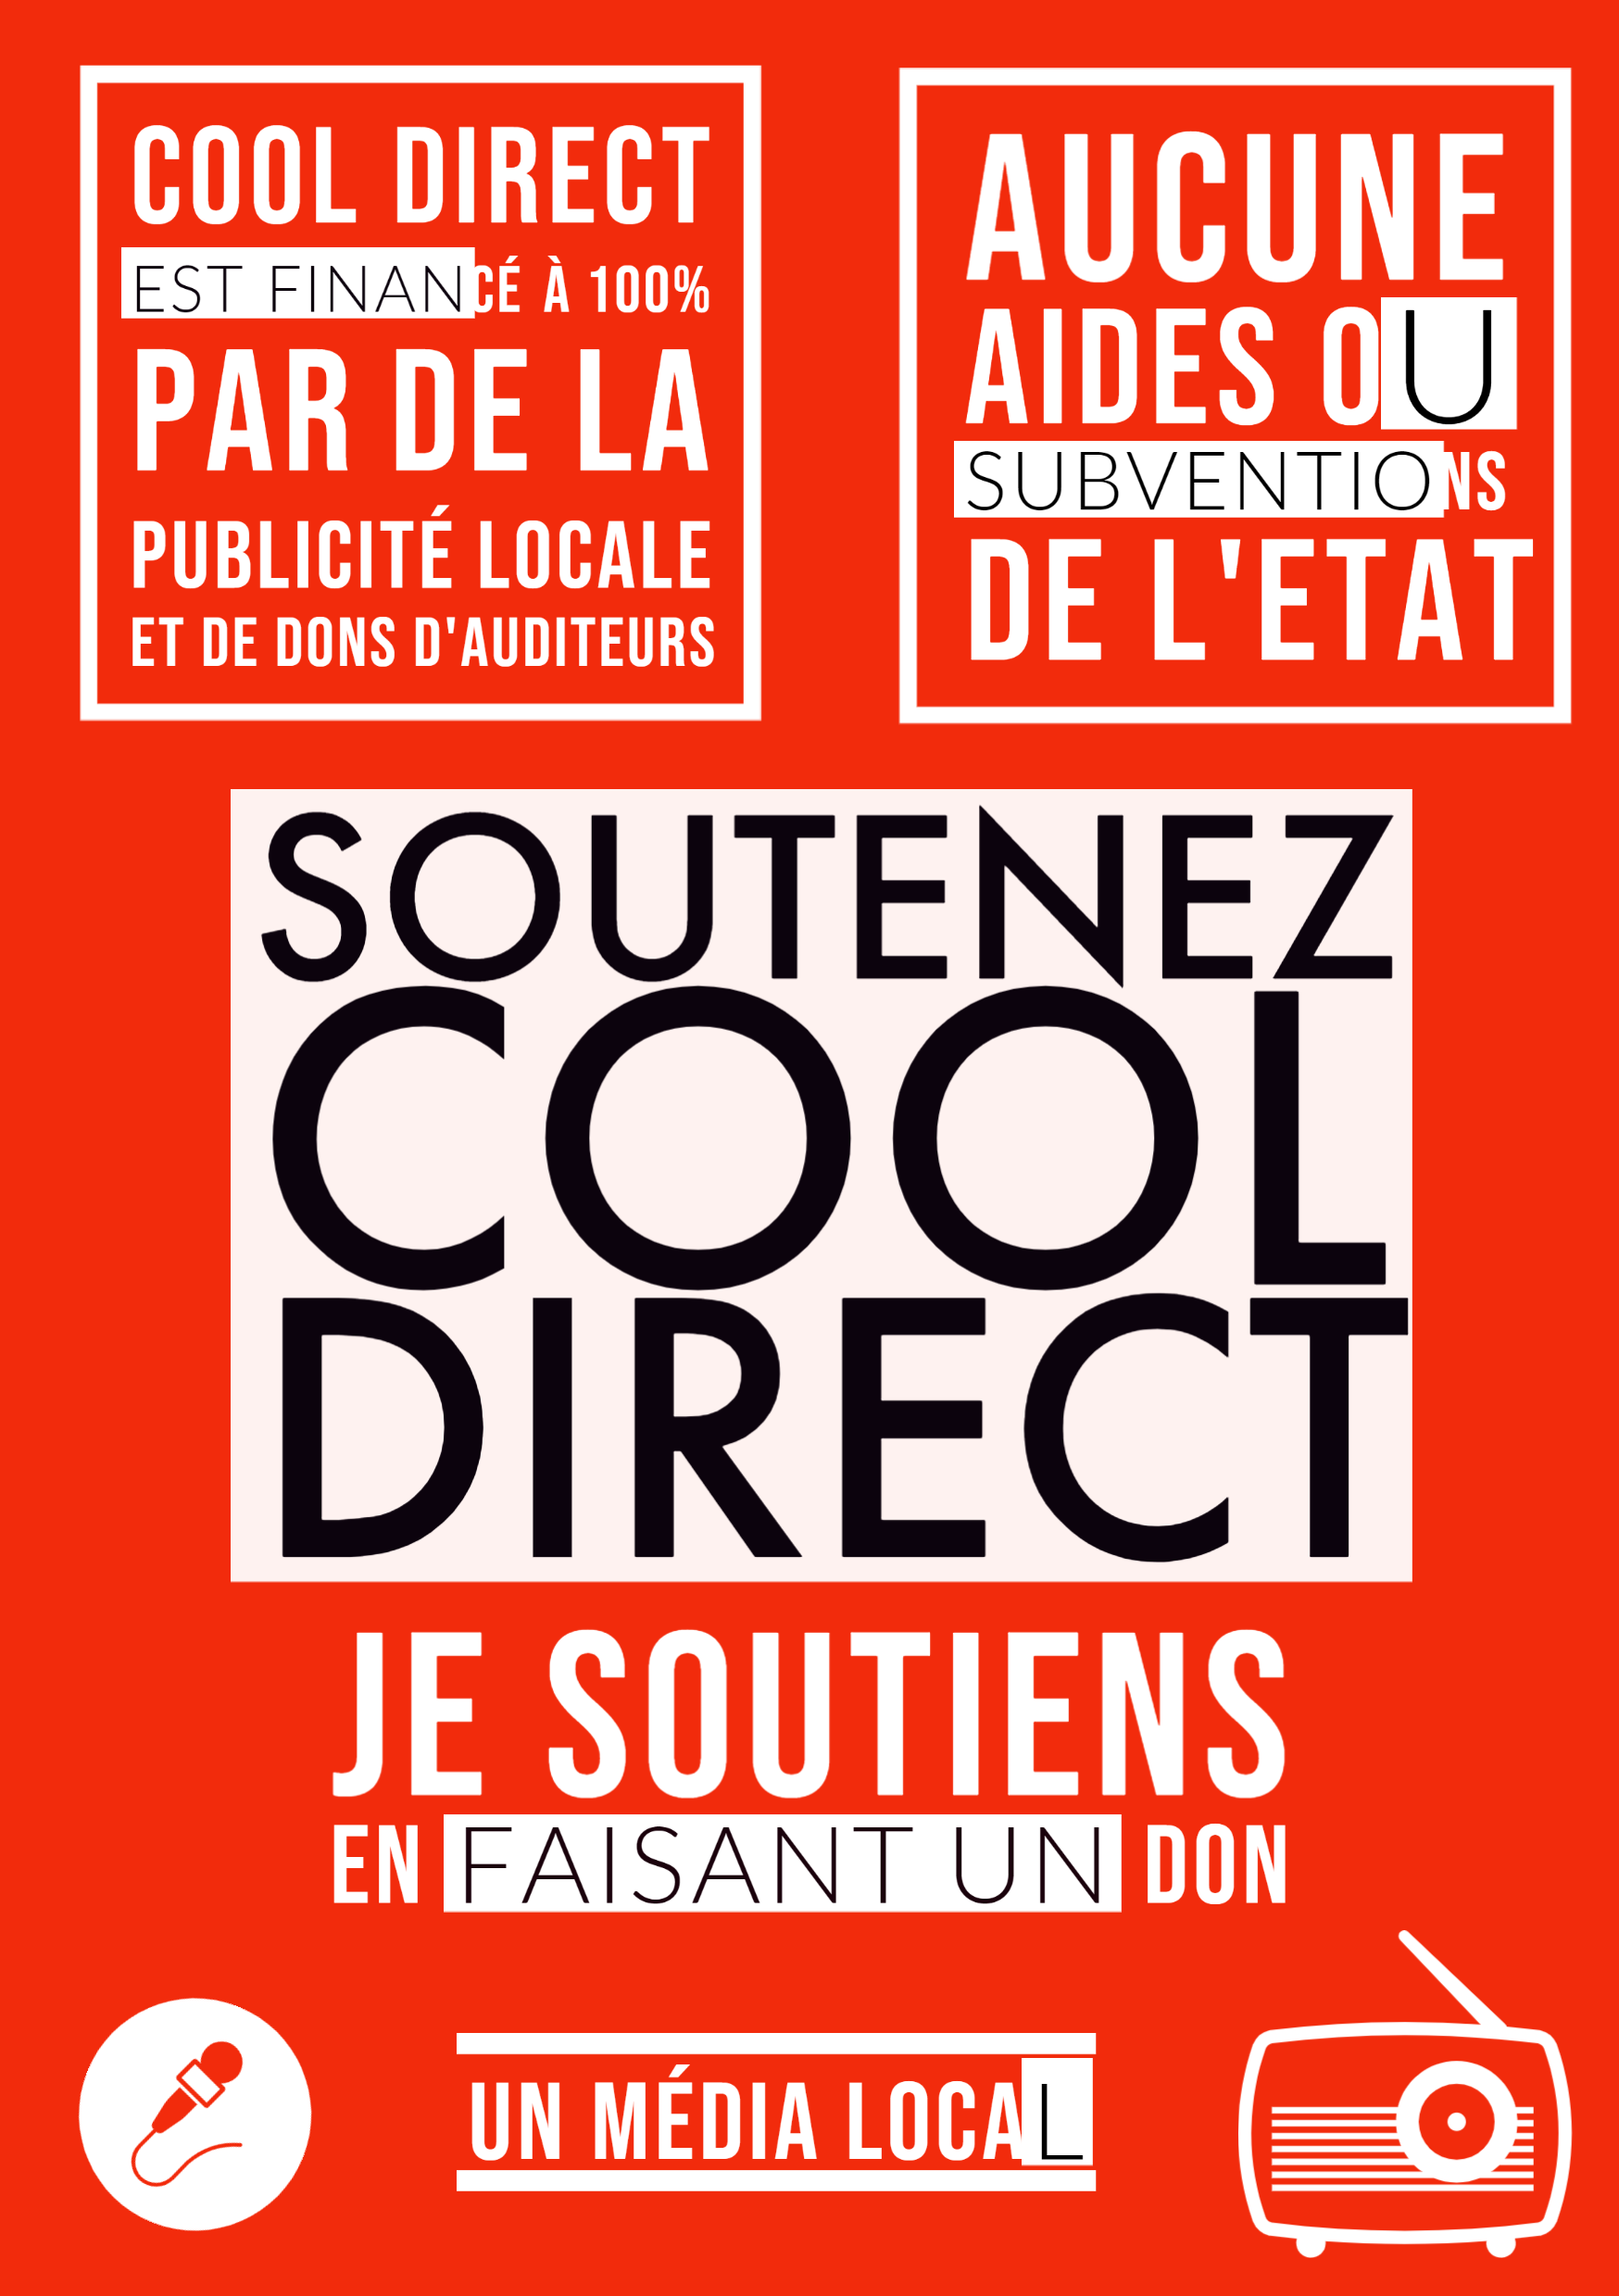 aider cooldirect.png (511 KB)